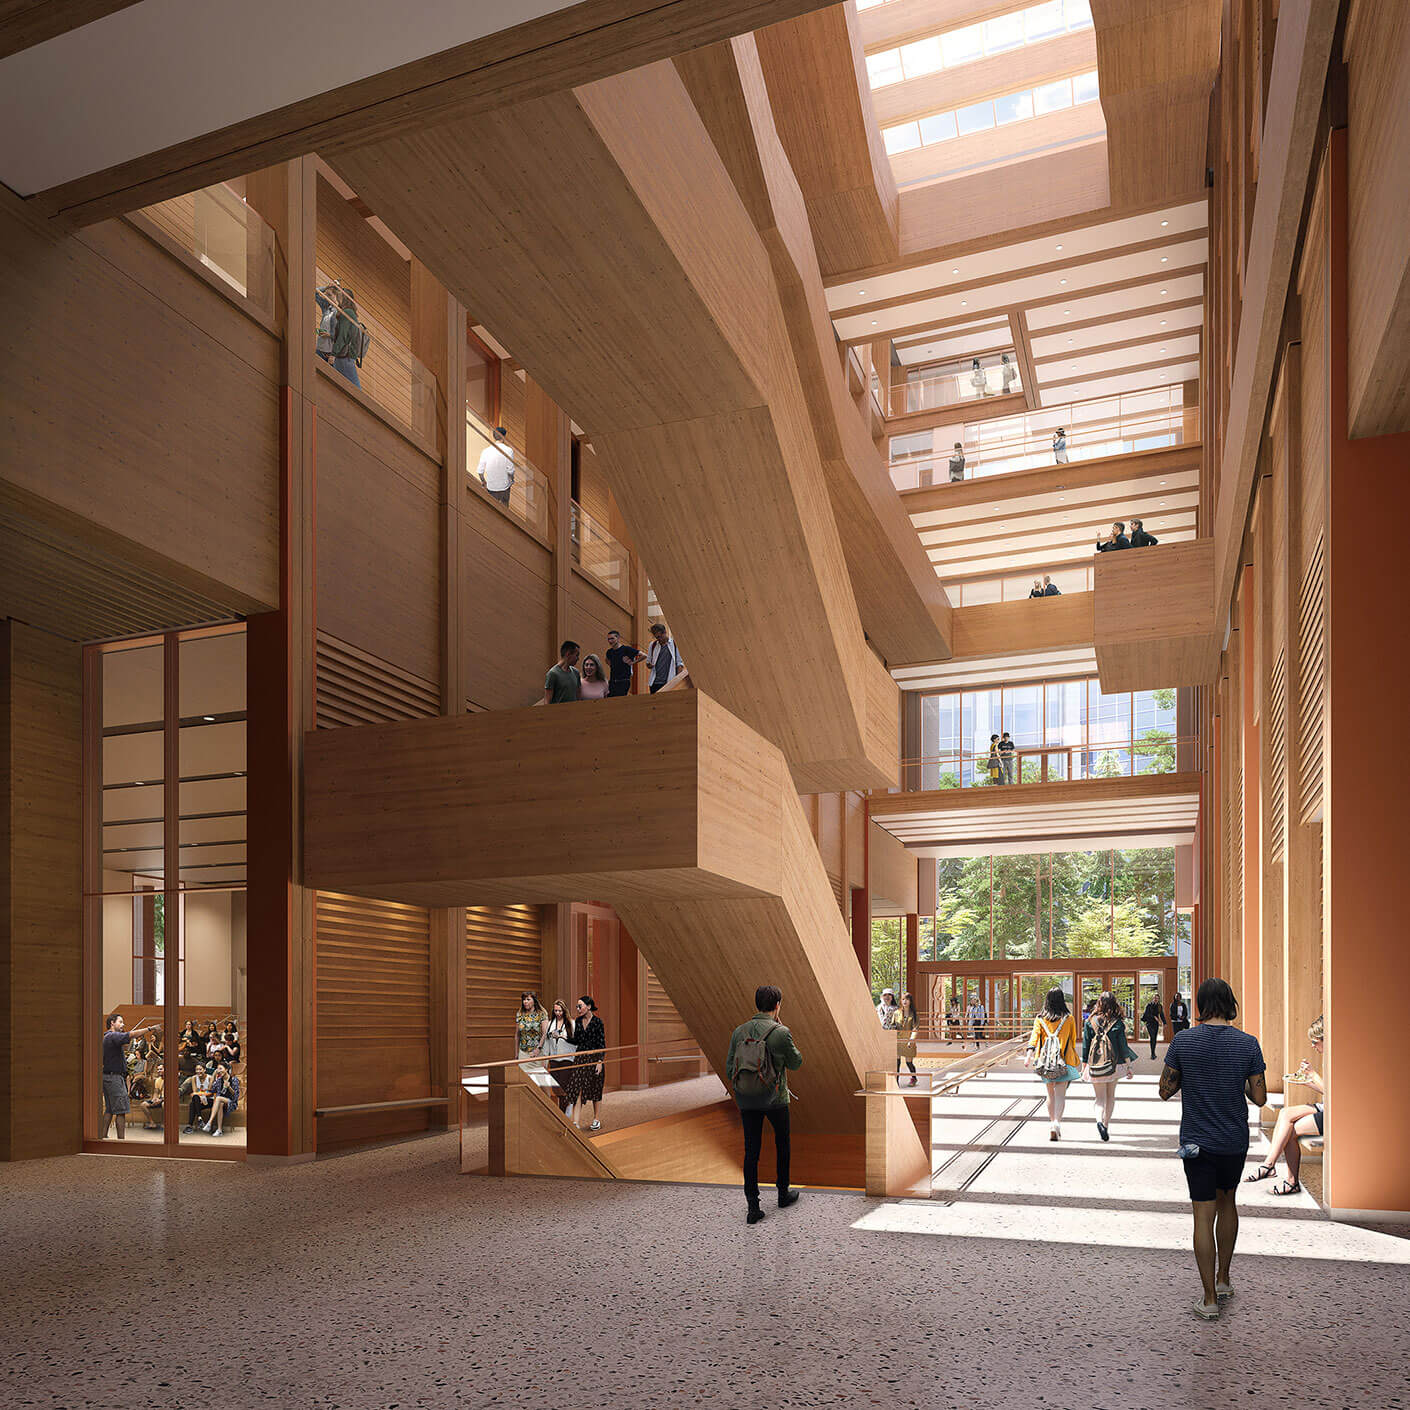 Rendering showing the atrium from the ground floor level of UBC Gateway building.